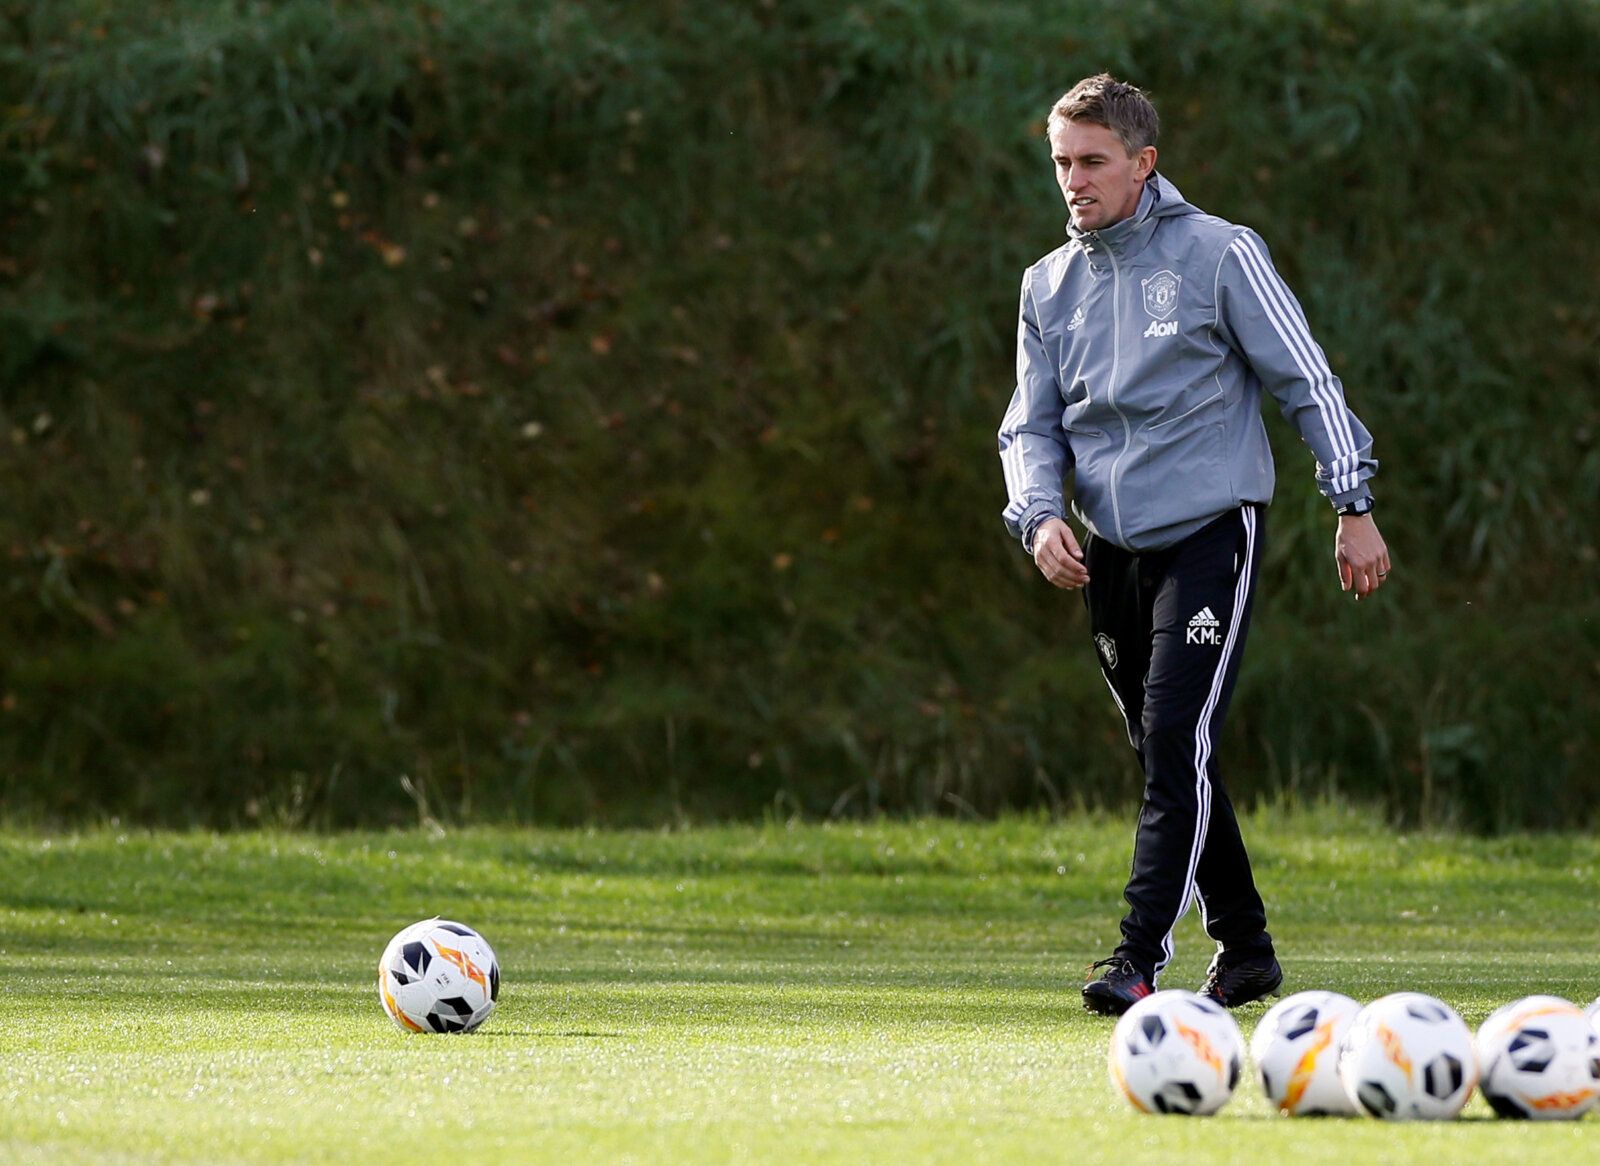 Soccer Football - Europa League - Manchester United Training - Aon Training Complex, Manchester, Britain - October 23, 2019   Manchester United assistant coach Kieran McKenna during training   Action Images via Reuters/Jason Cairnduff